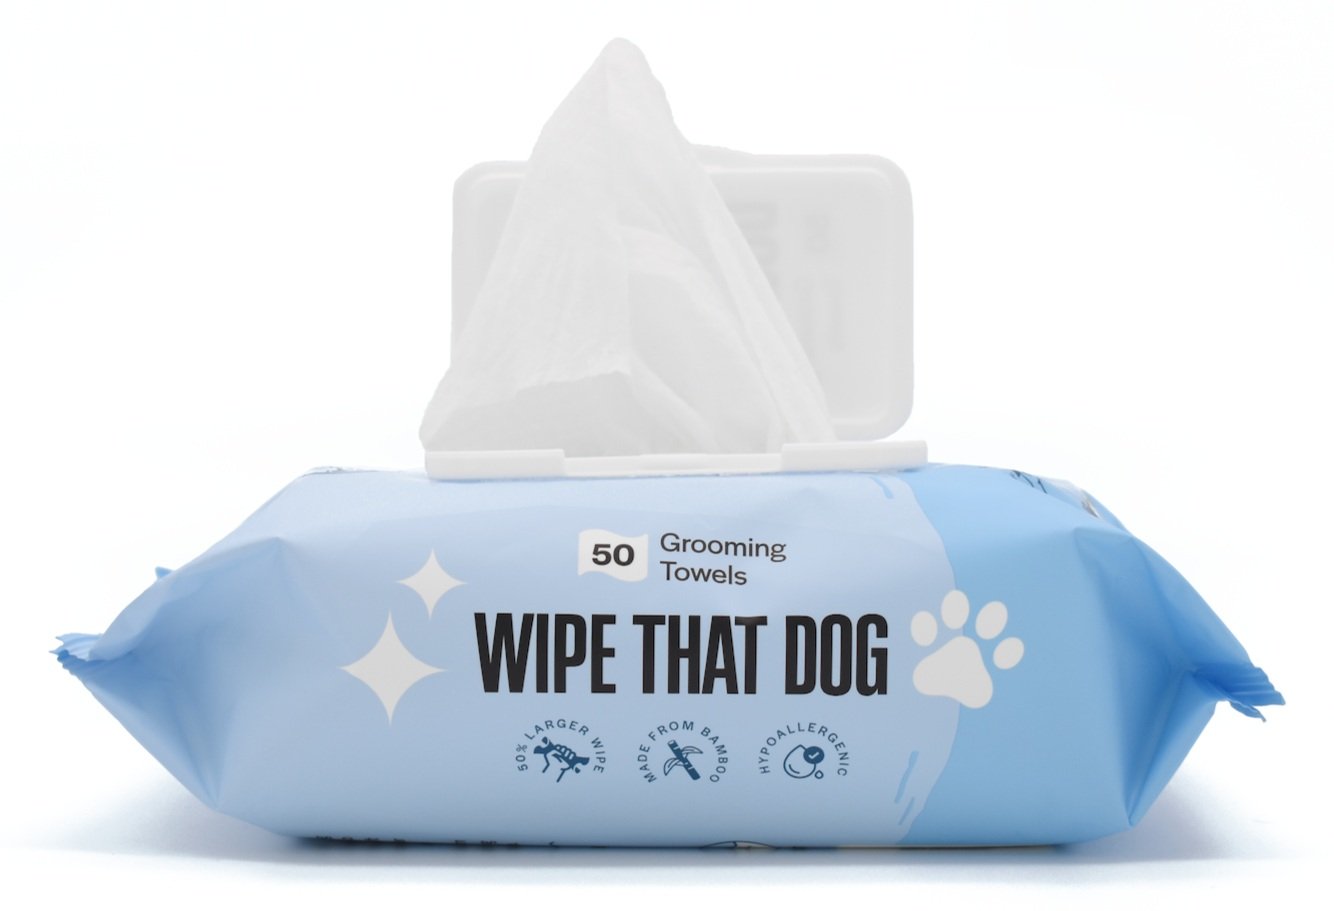 Wipe That Tush — MightyGood.